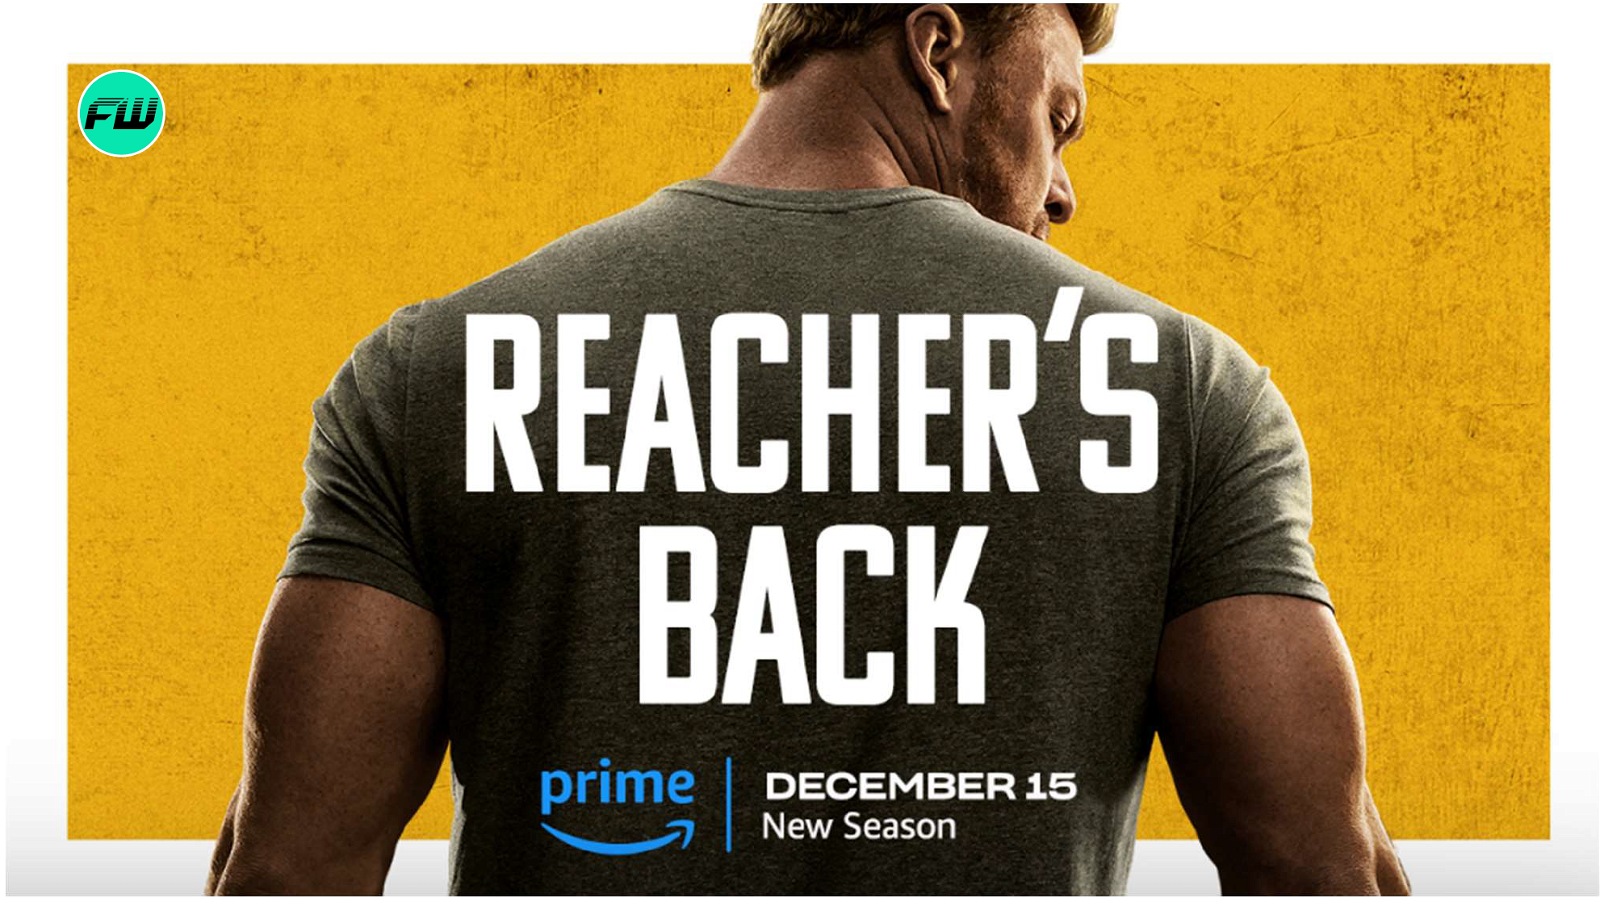 Reacher Season 2 Episode 6 Release Date, Time, and Preview